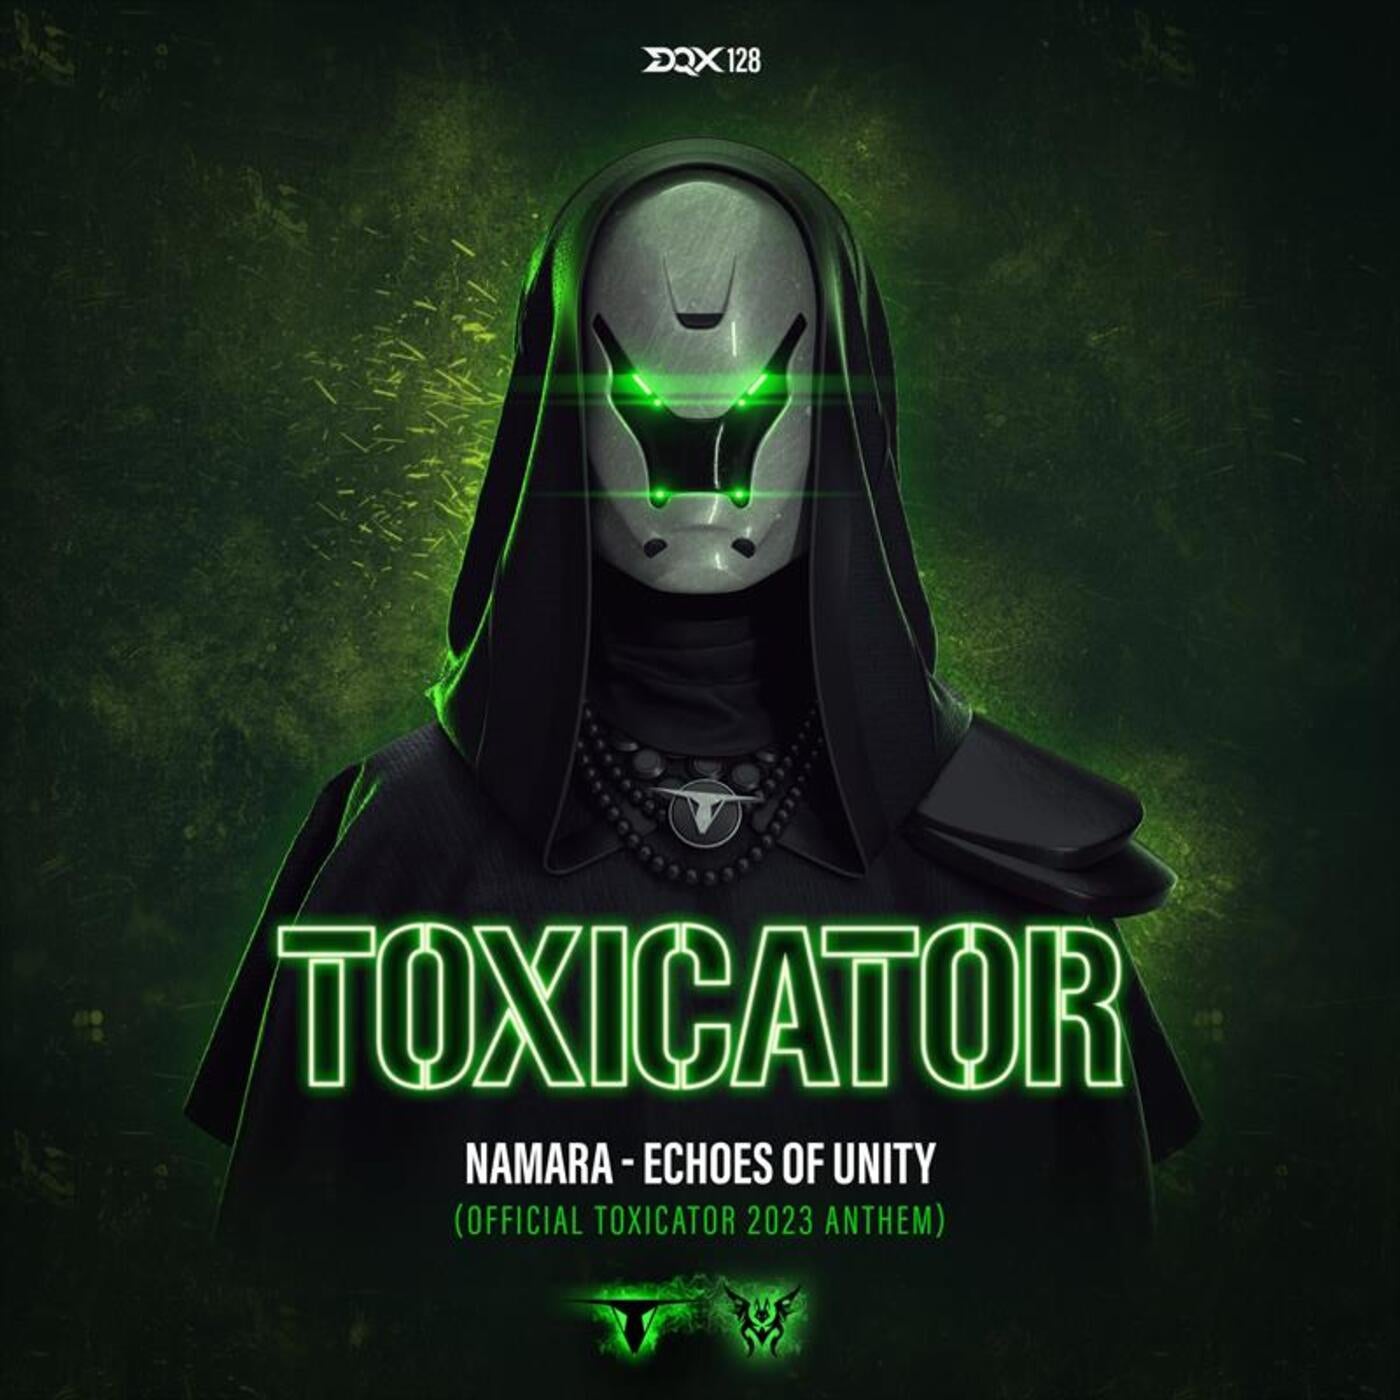 Echoes of Unity (Official Toxicator 2023 Anthem)